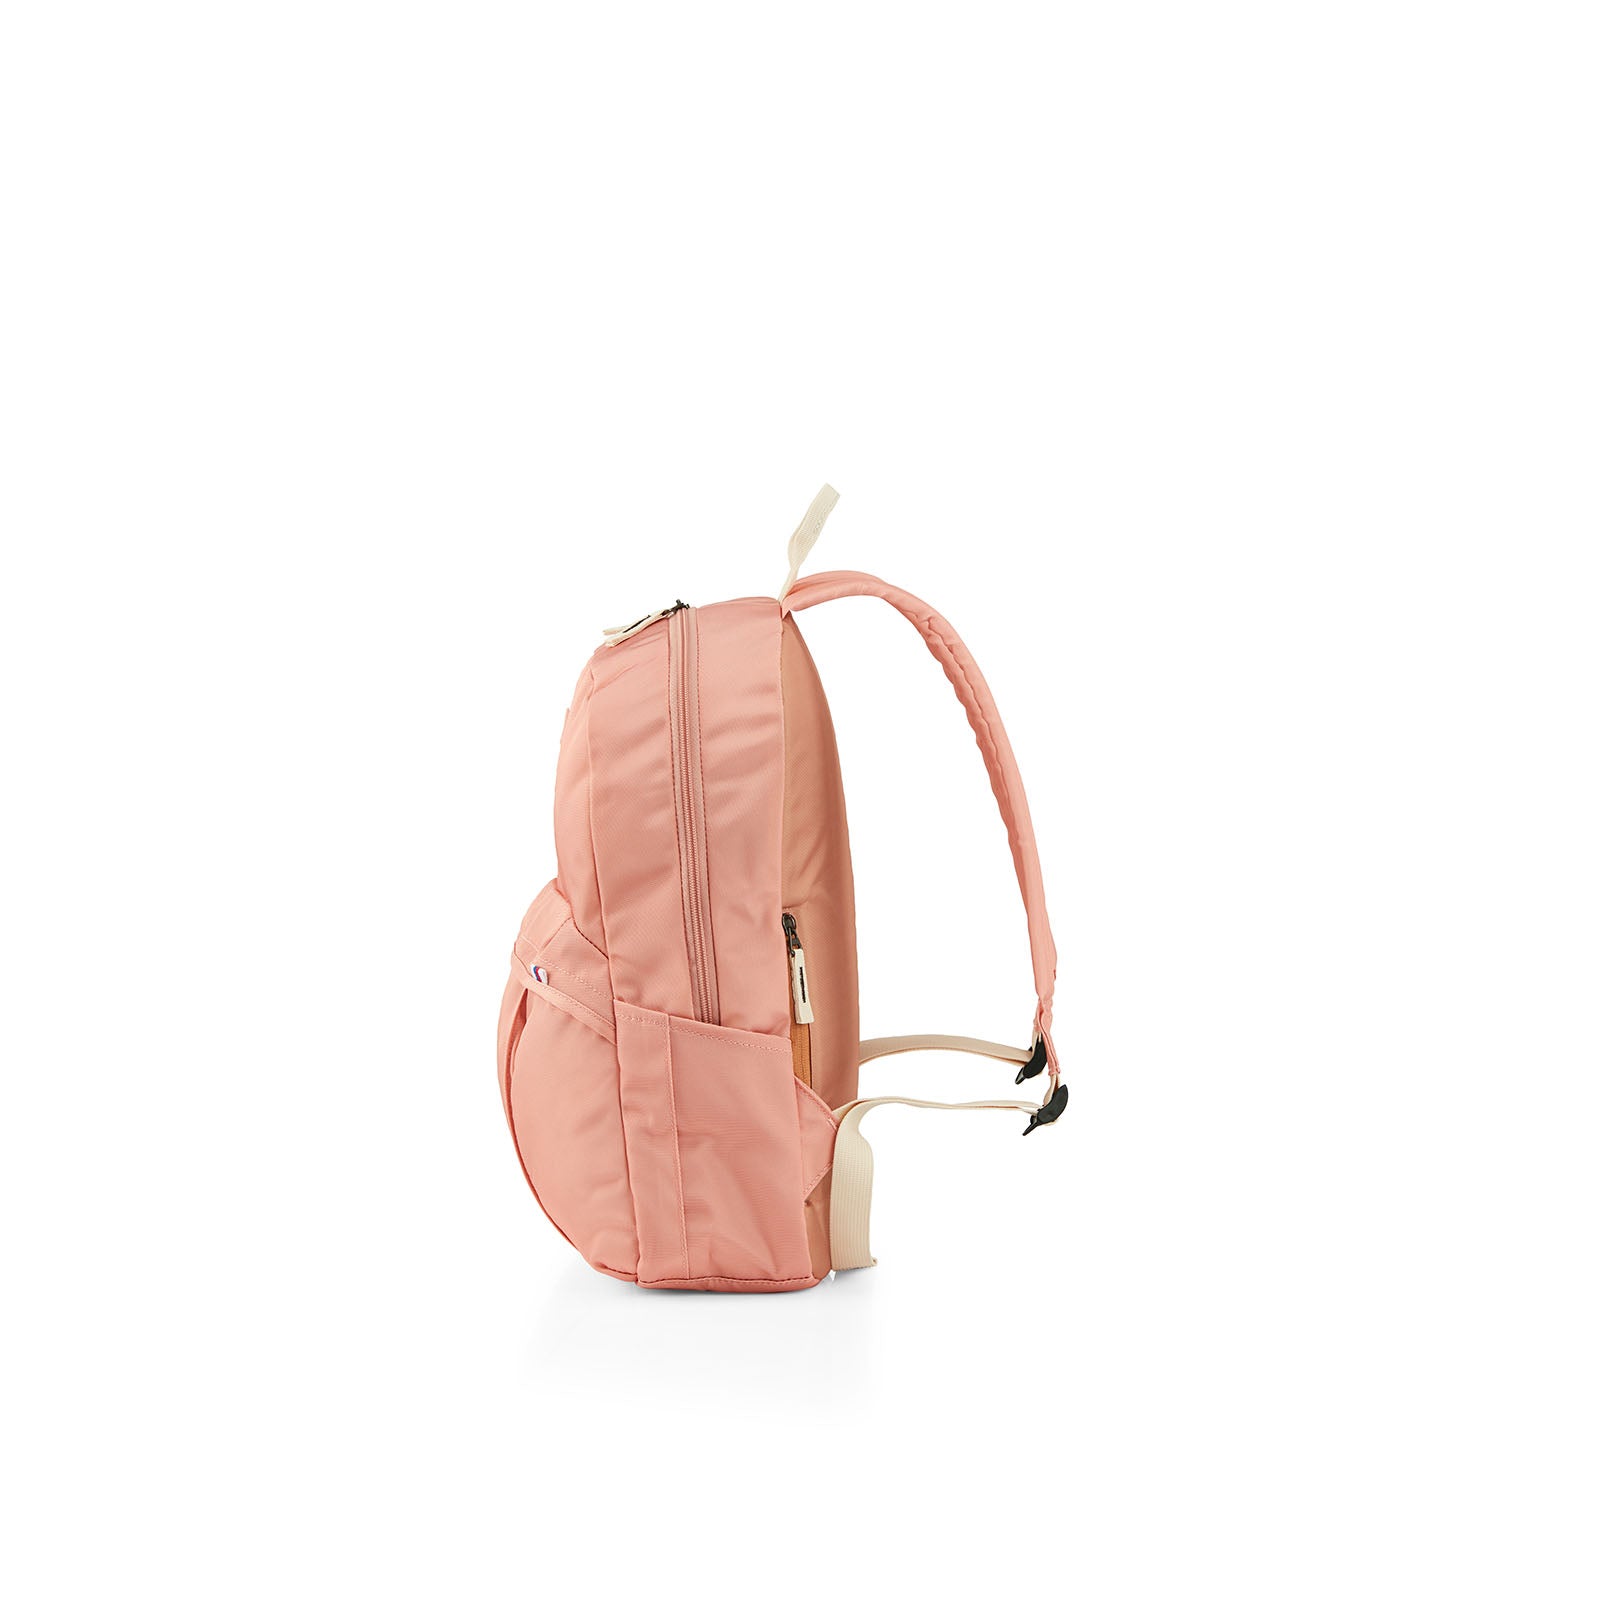 American-Tourister-Rudy-Everyday-Backpack-Apricot-Ice-Side